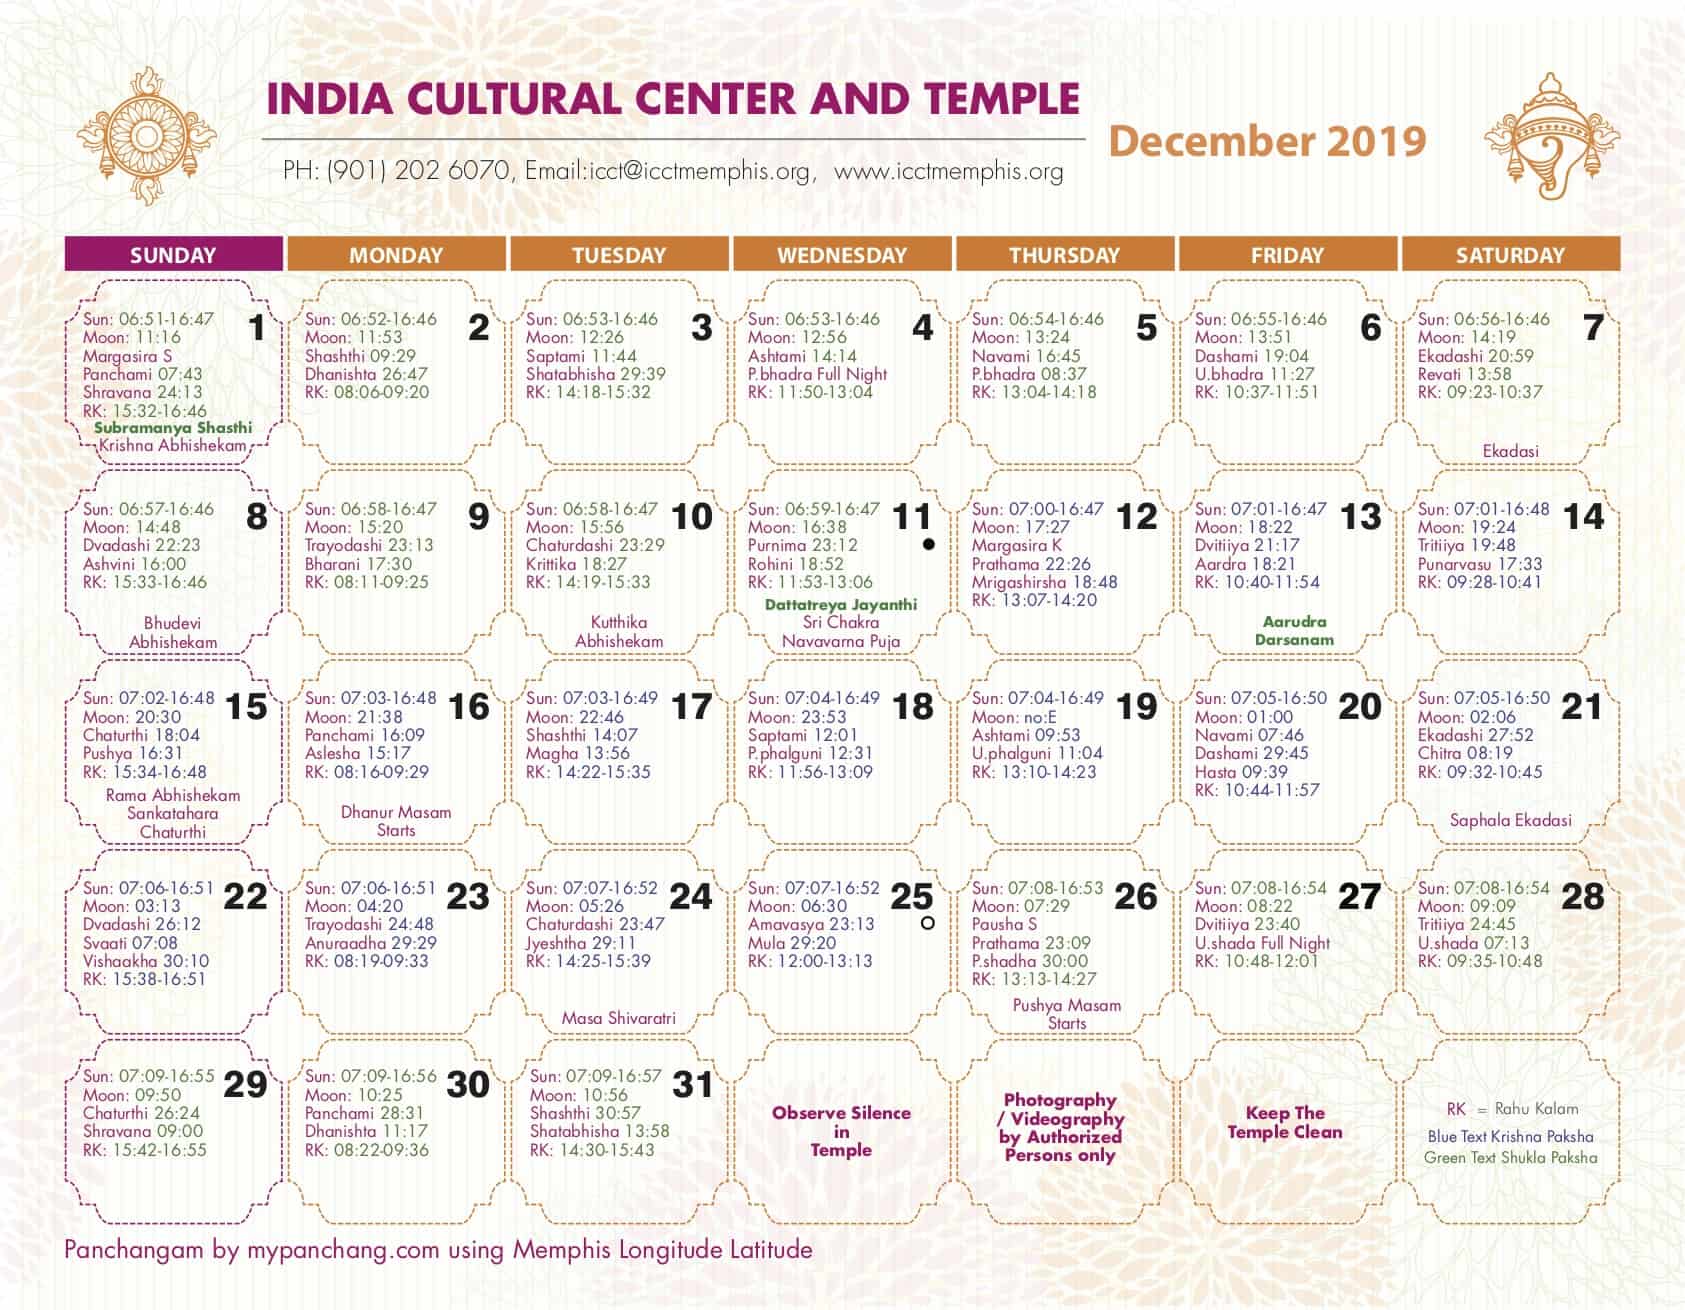 Temple Calendar India Cultural Center and Temple